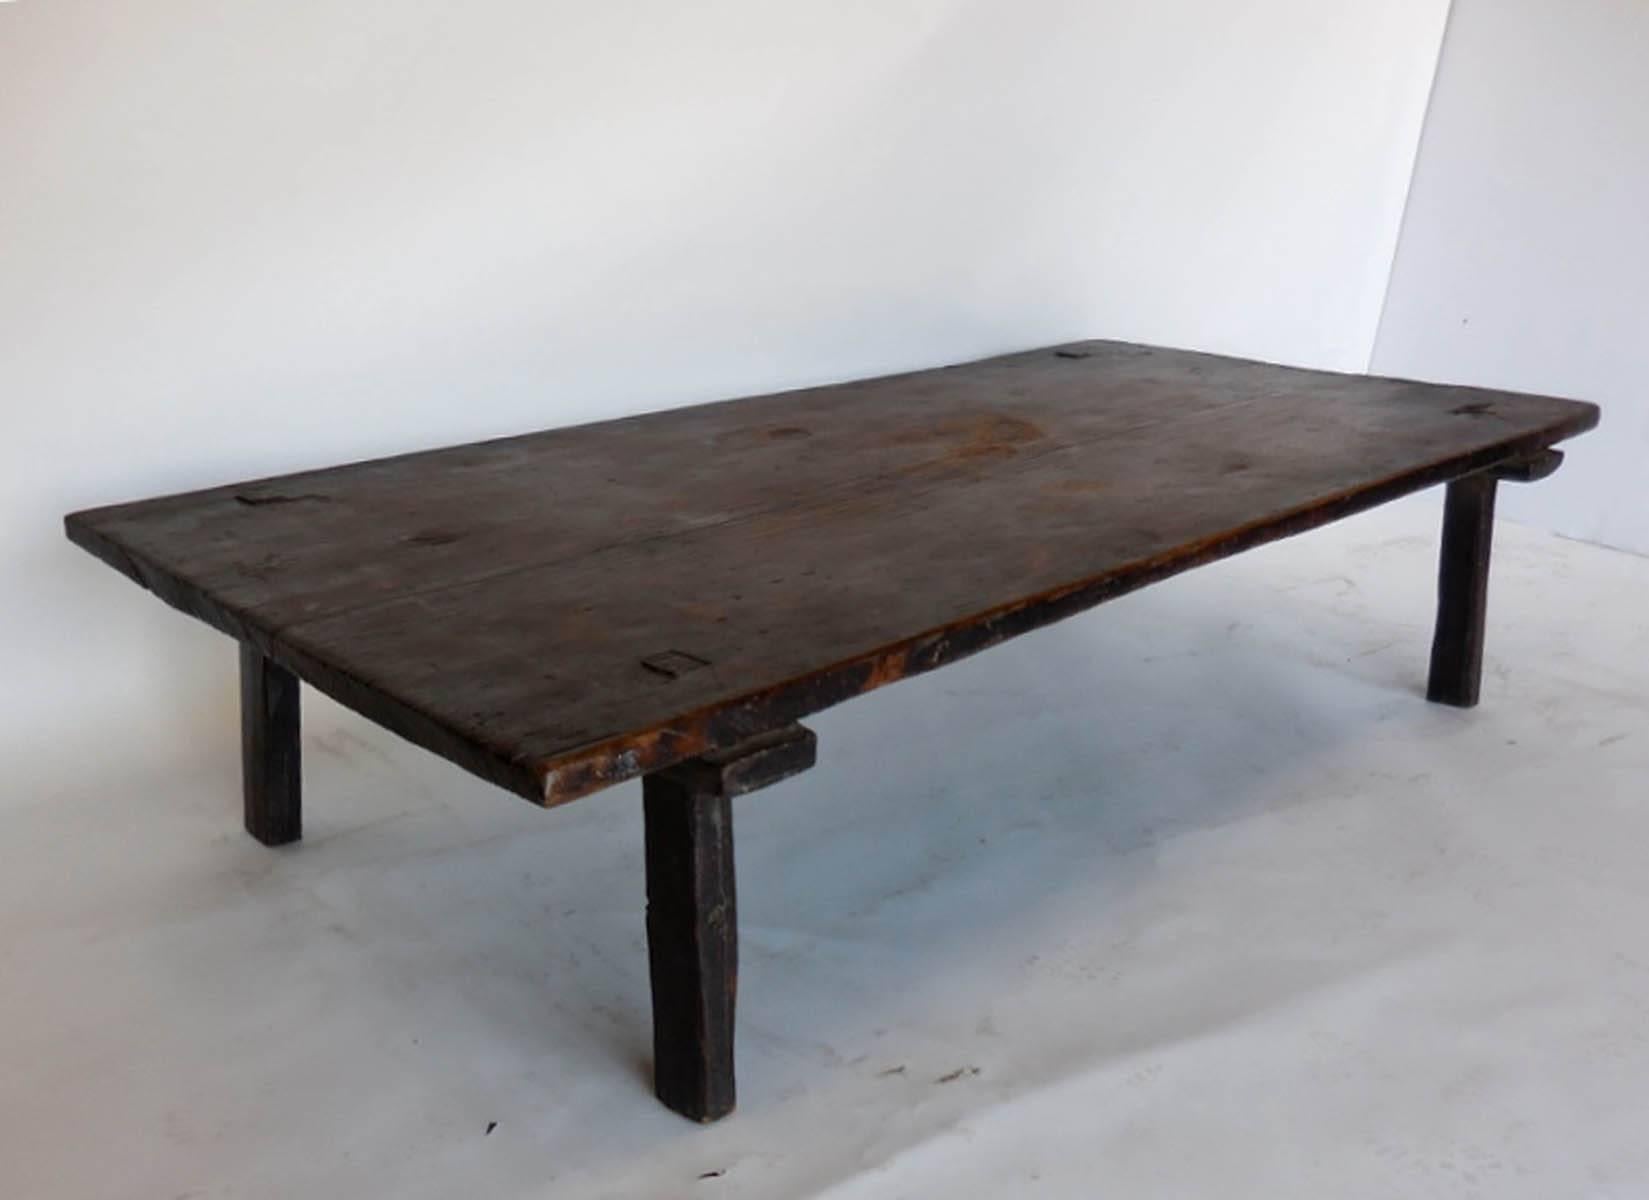 One wide board top, all original coffee table, (originally a bed). Straight legs, mortise and tenon construction. Some candle burns, original dark patina, which occurred naturally since it existed in an indigenous home with open fires and smoke.